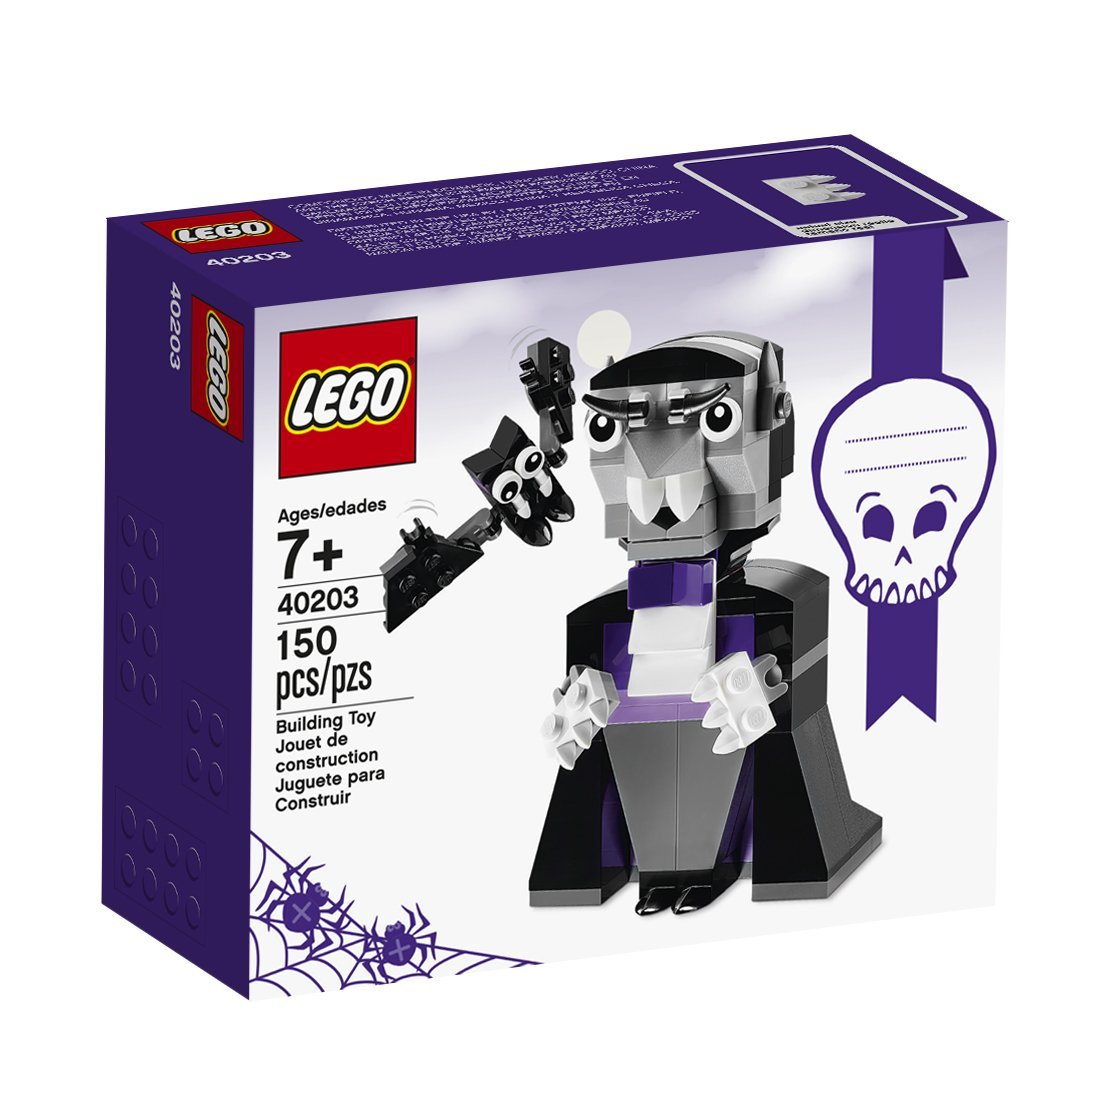 LEGO Creator Halloween Vampire and Bat Building Kit Only $7.99! (150 Pieces)